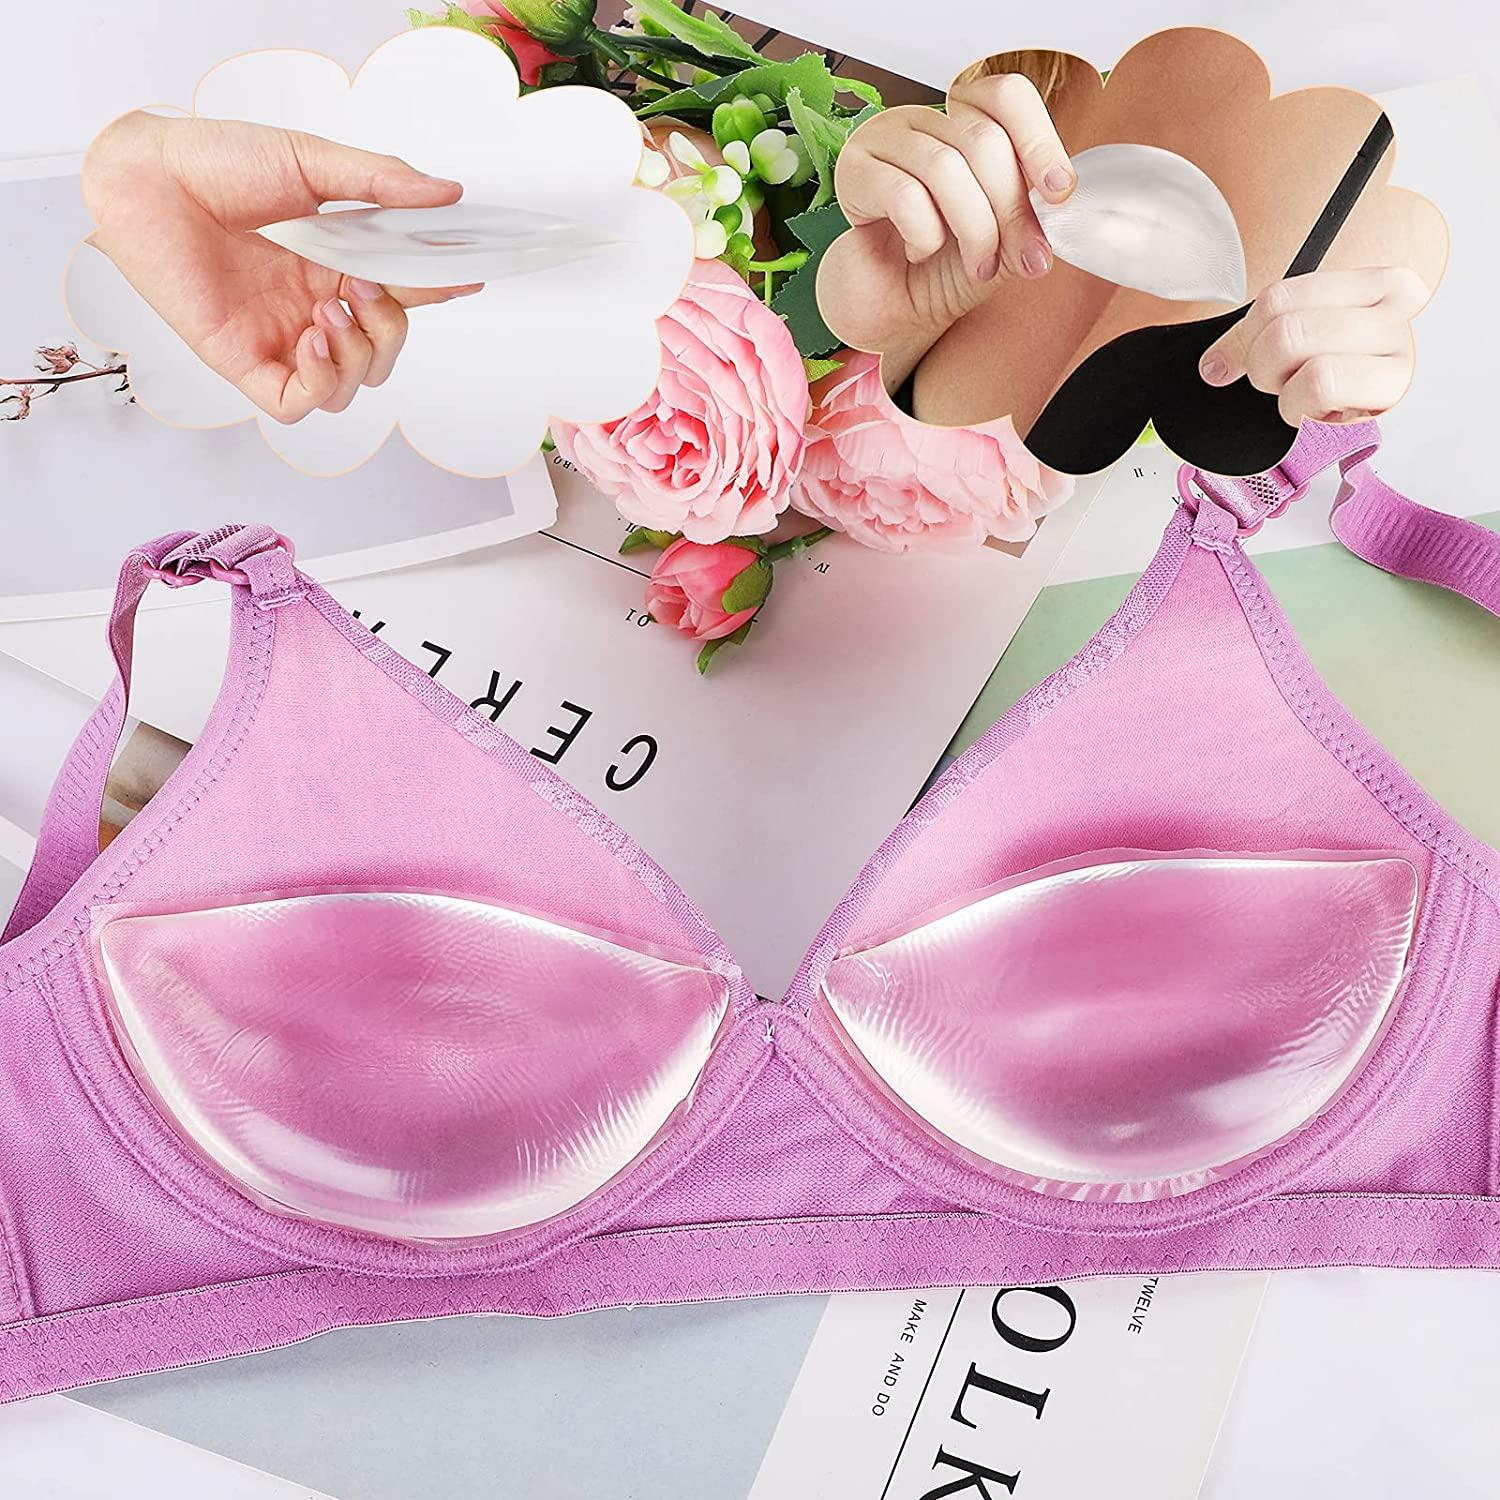 Silicone Bra Inserts Push up Breast Cups Enhancers pads Clear